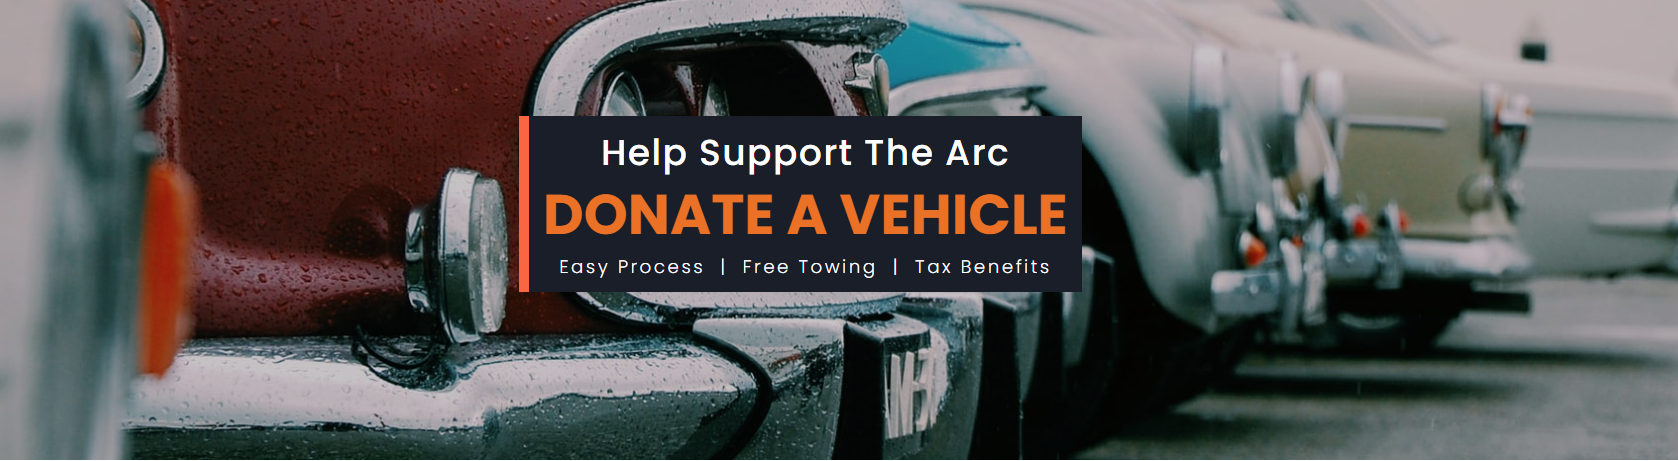 A row of cars parked. Overlaying it: a black box with the words "Help Support The Arc. Donate a vehicle. Easy Process. Free Towing. Tax Benefits."